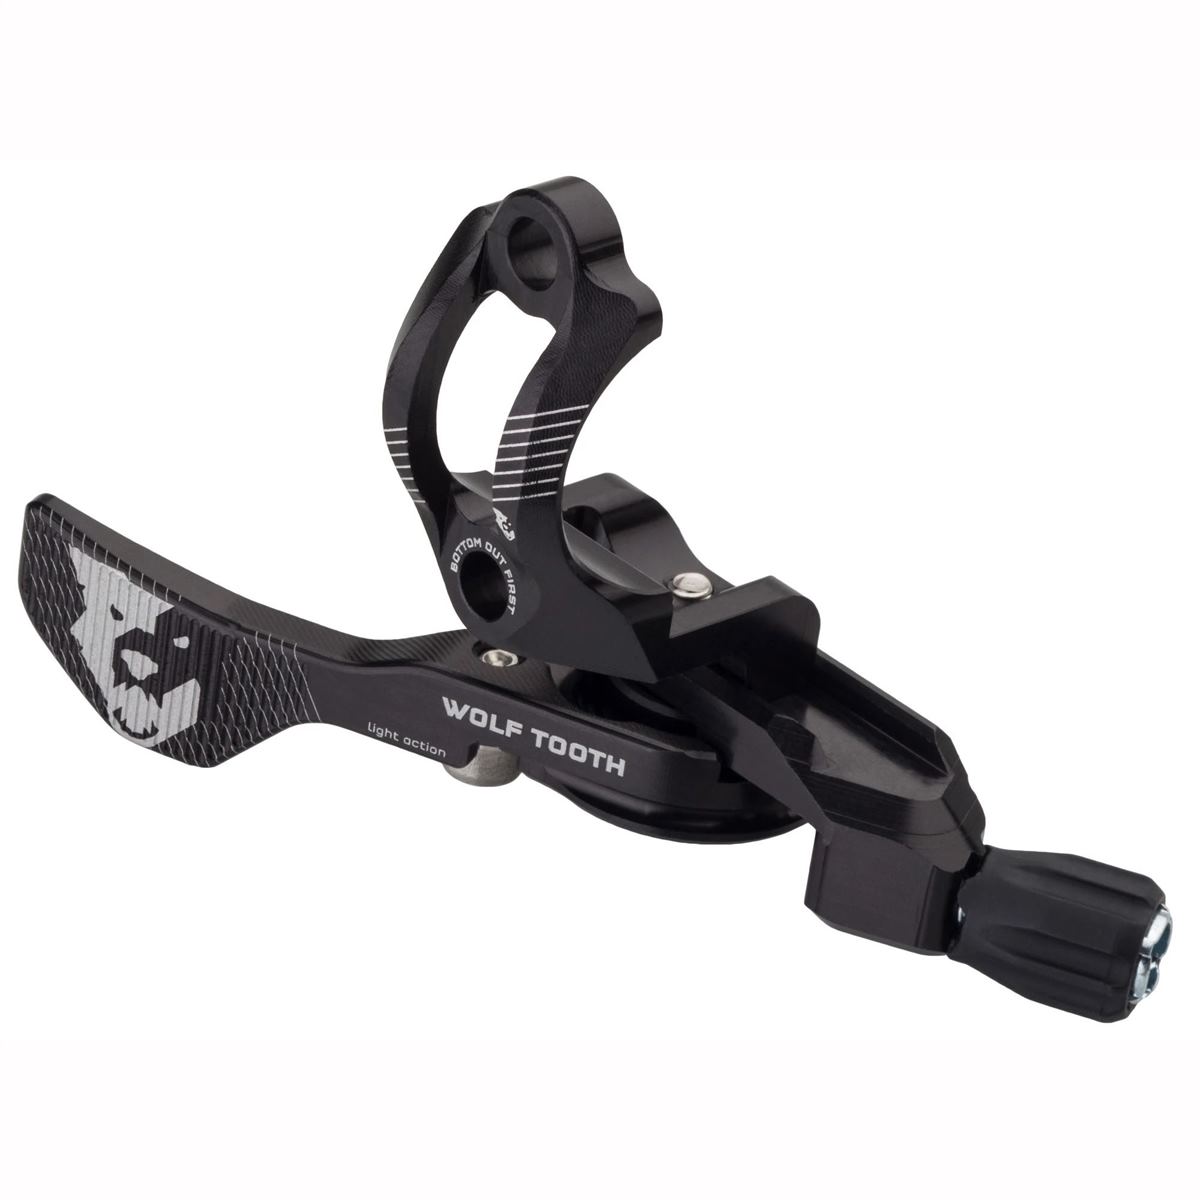 Wolf Tooth Remote Lever Light Action Magura, Black